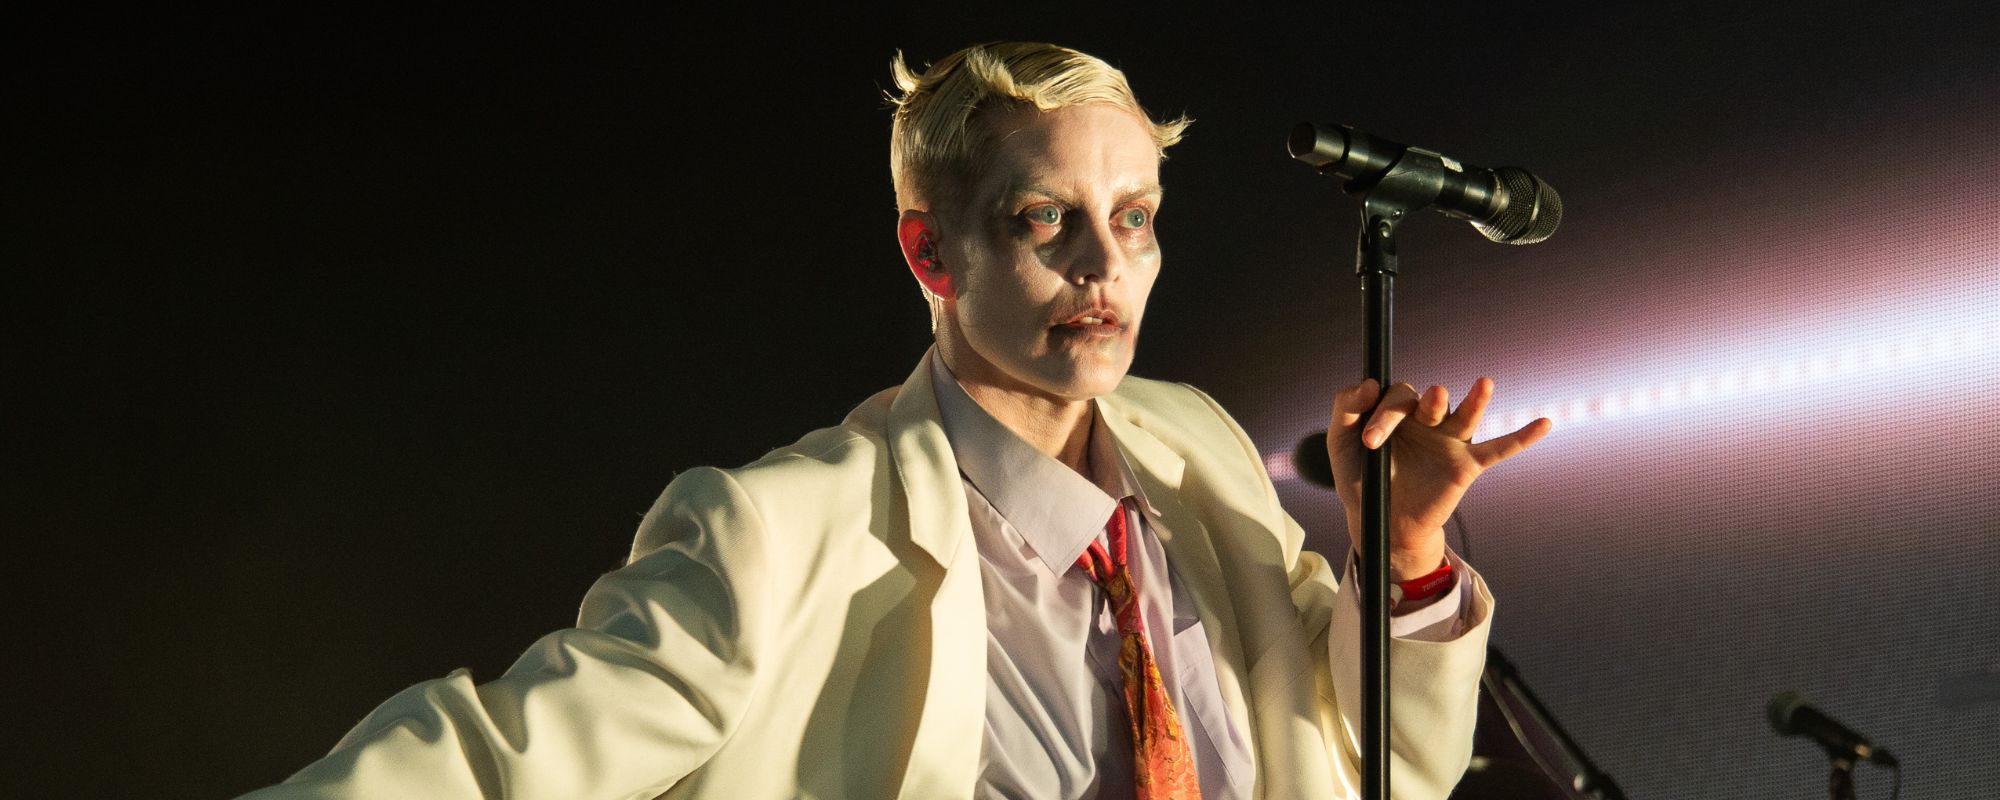 Swedish Electronic Group Fever Ray Releases New Music Video; Announces Tour